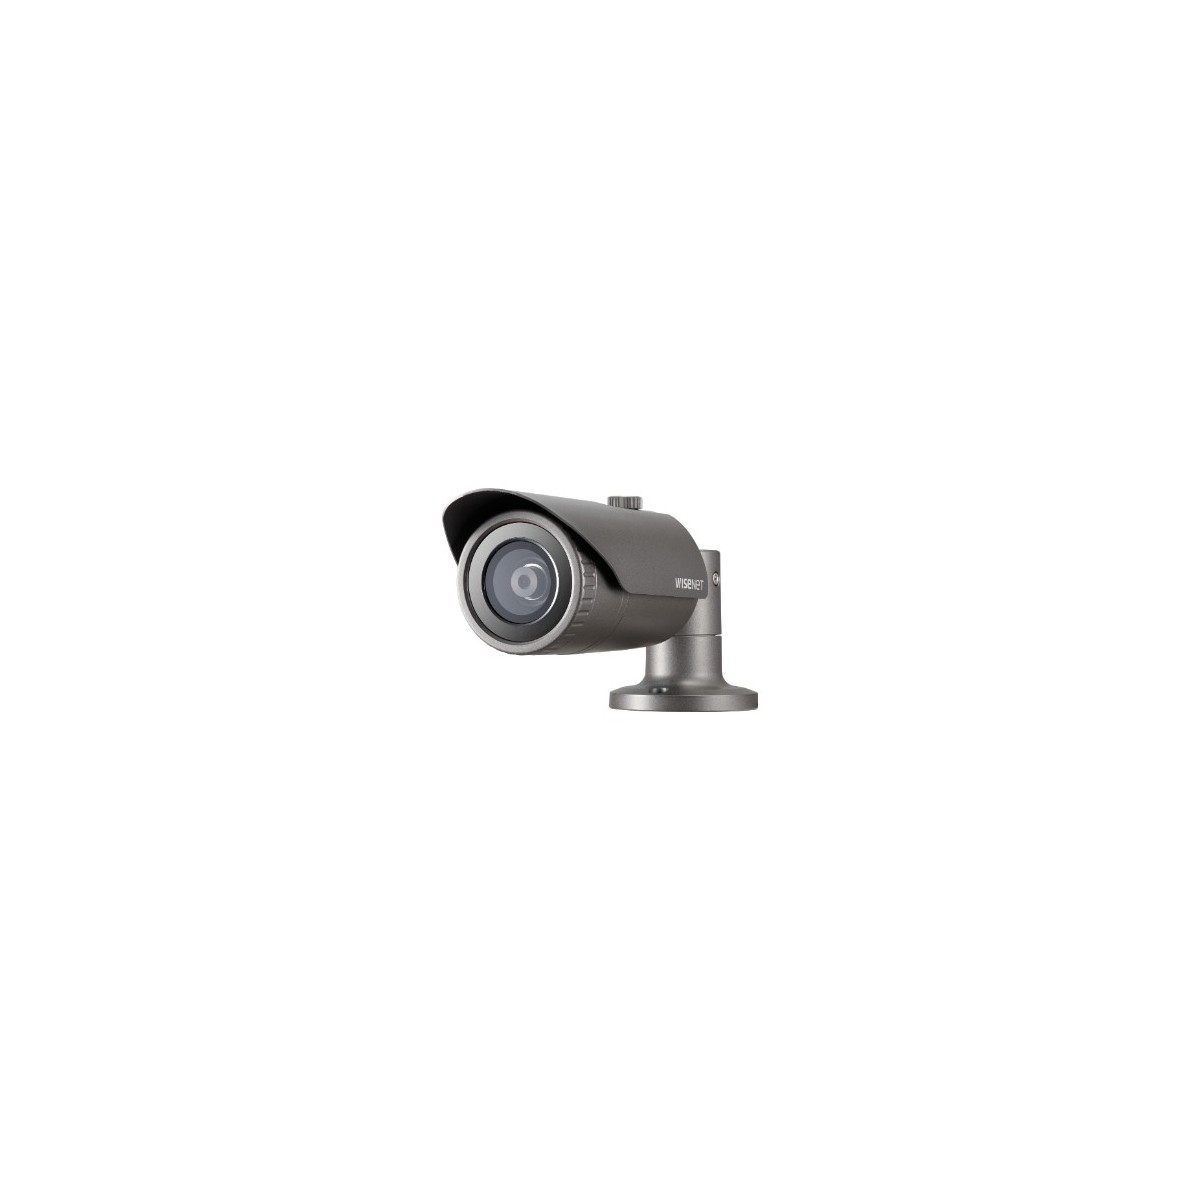 Hanwha Techwin Hanwha QNO-6012R - IP security camera - Outdoor - Wired - Bullet - Ceiling/wall - Grey